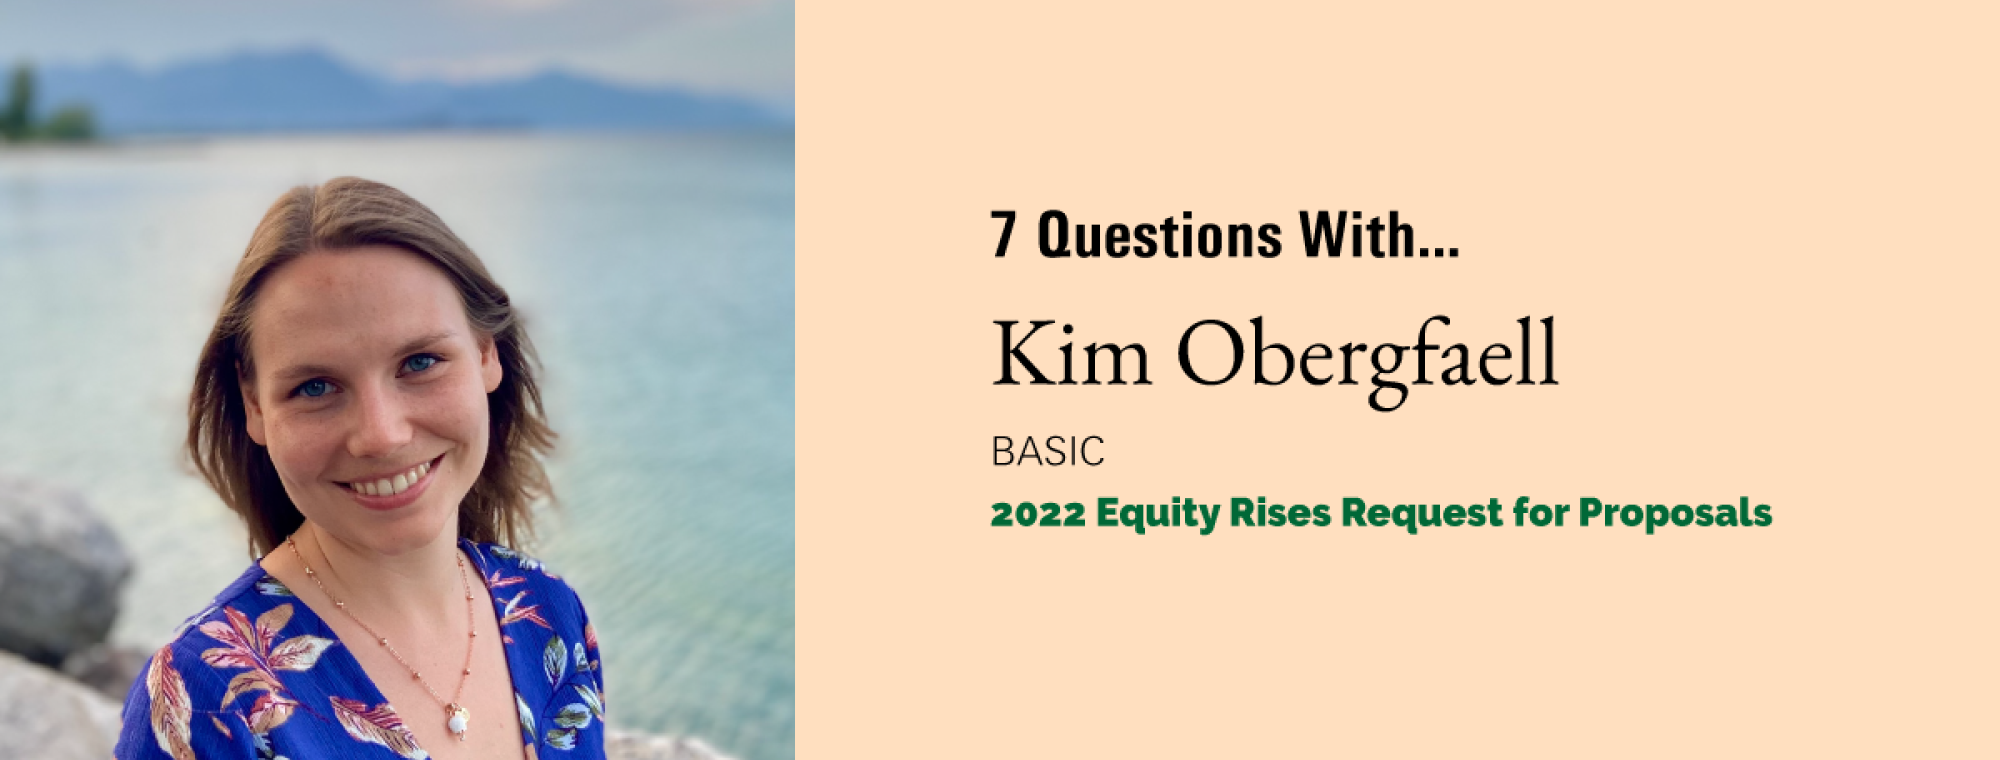 Seven Questions with Kim Obergfaell